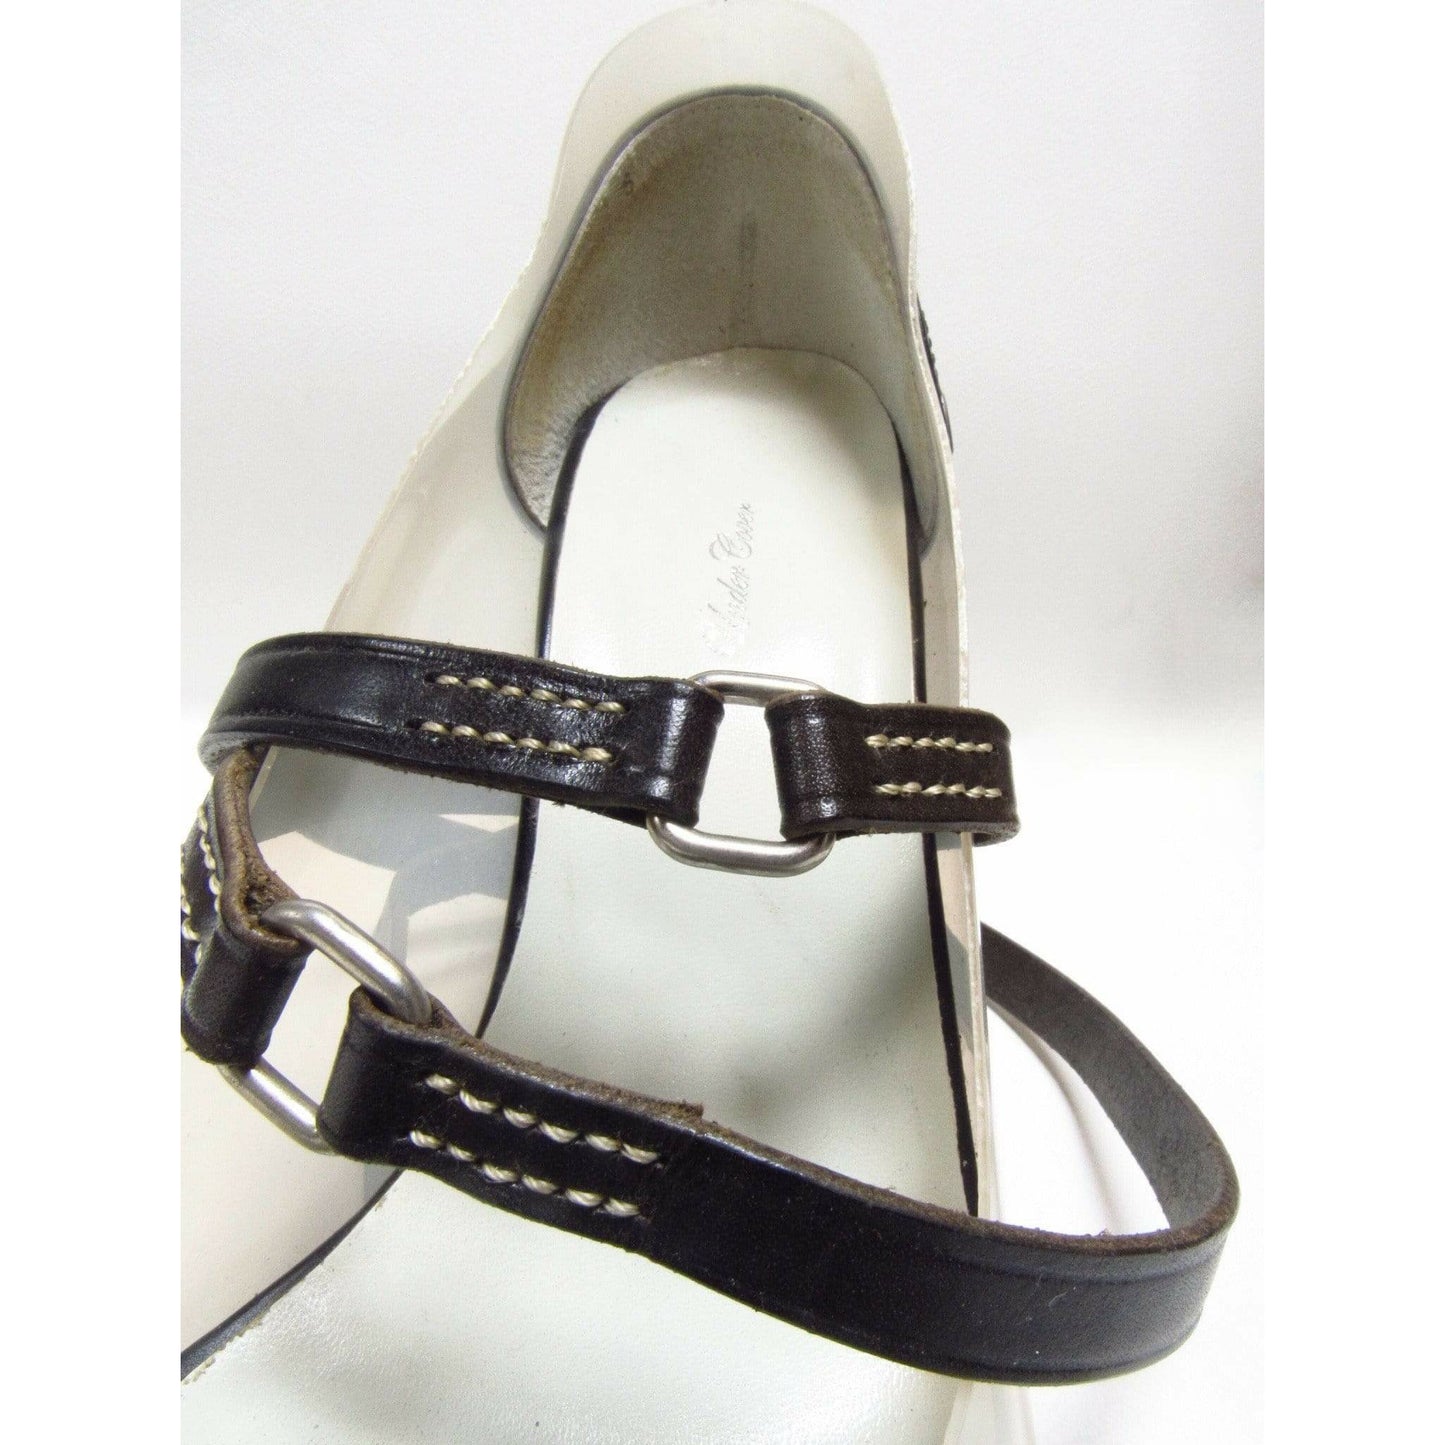 Shoes Undercover Vintage 'Less But Better' Black Strappy Heels Undercover